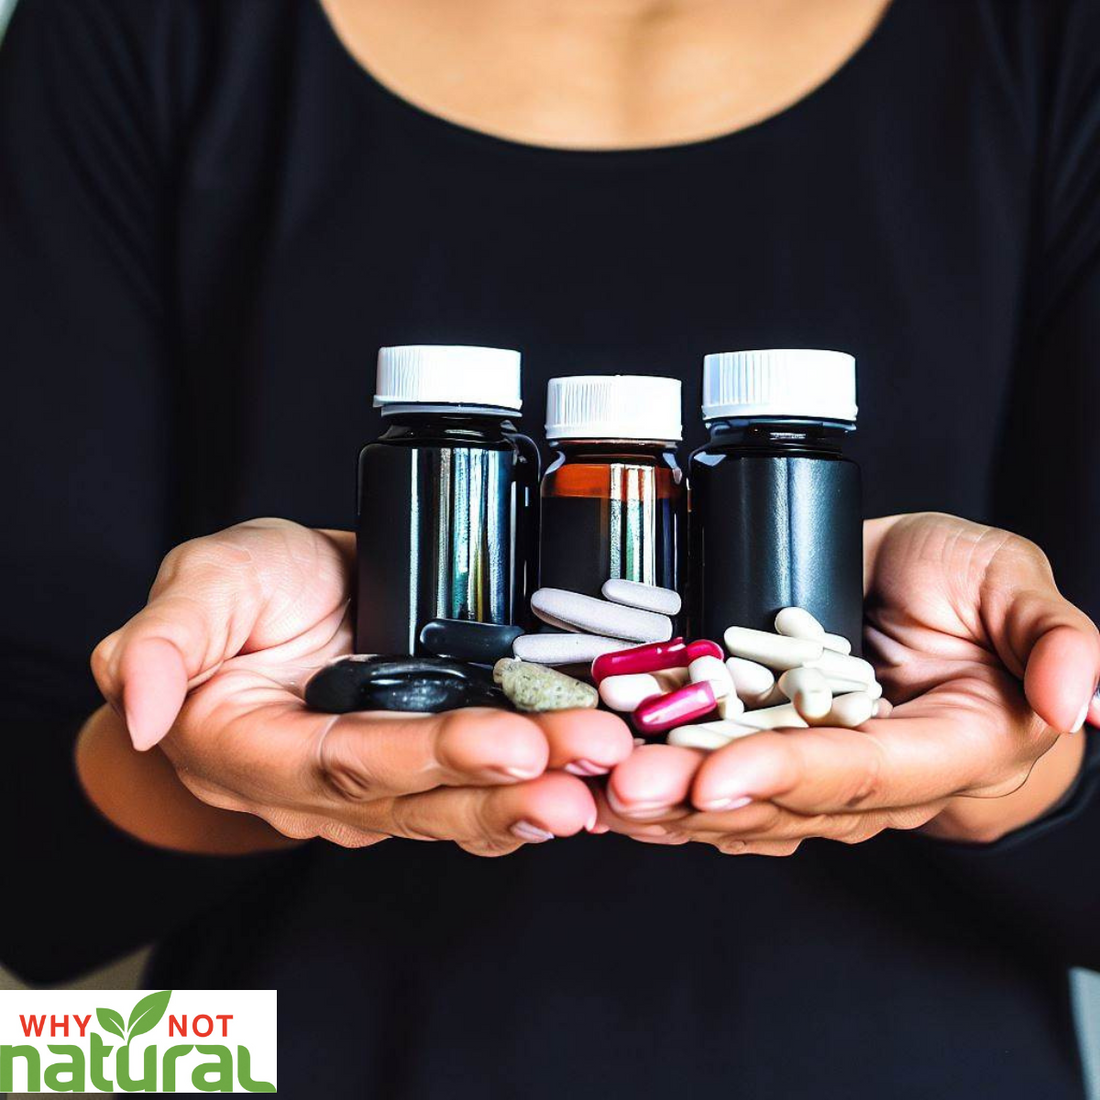 What vitamins and supplements should not be taken together?